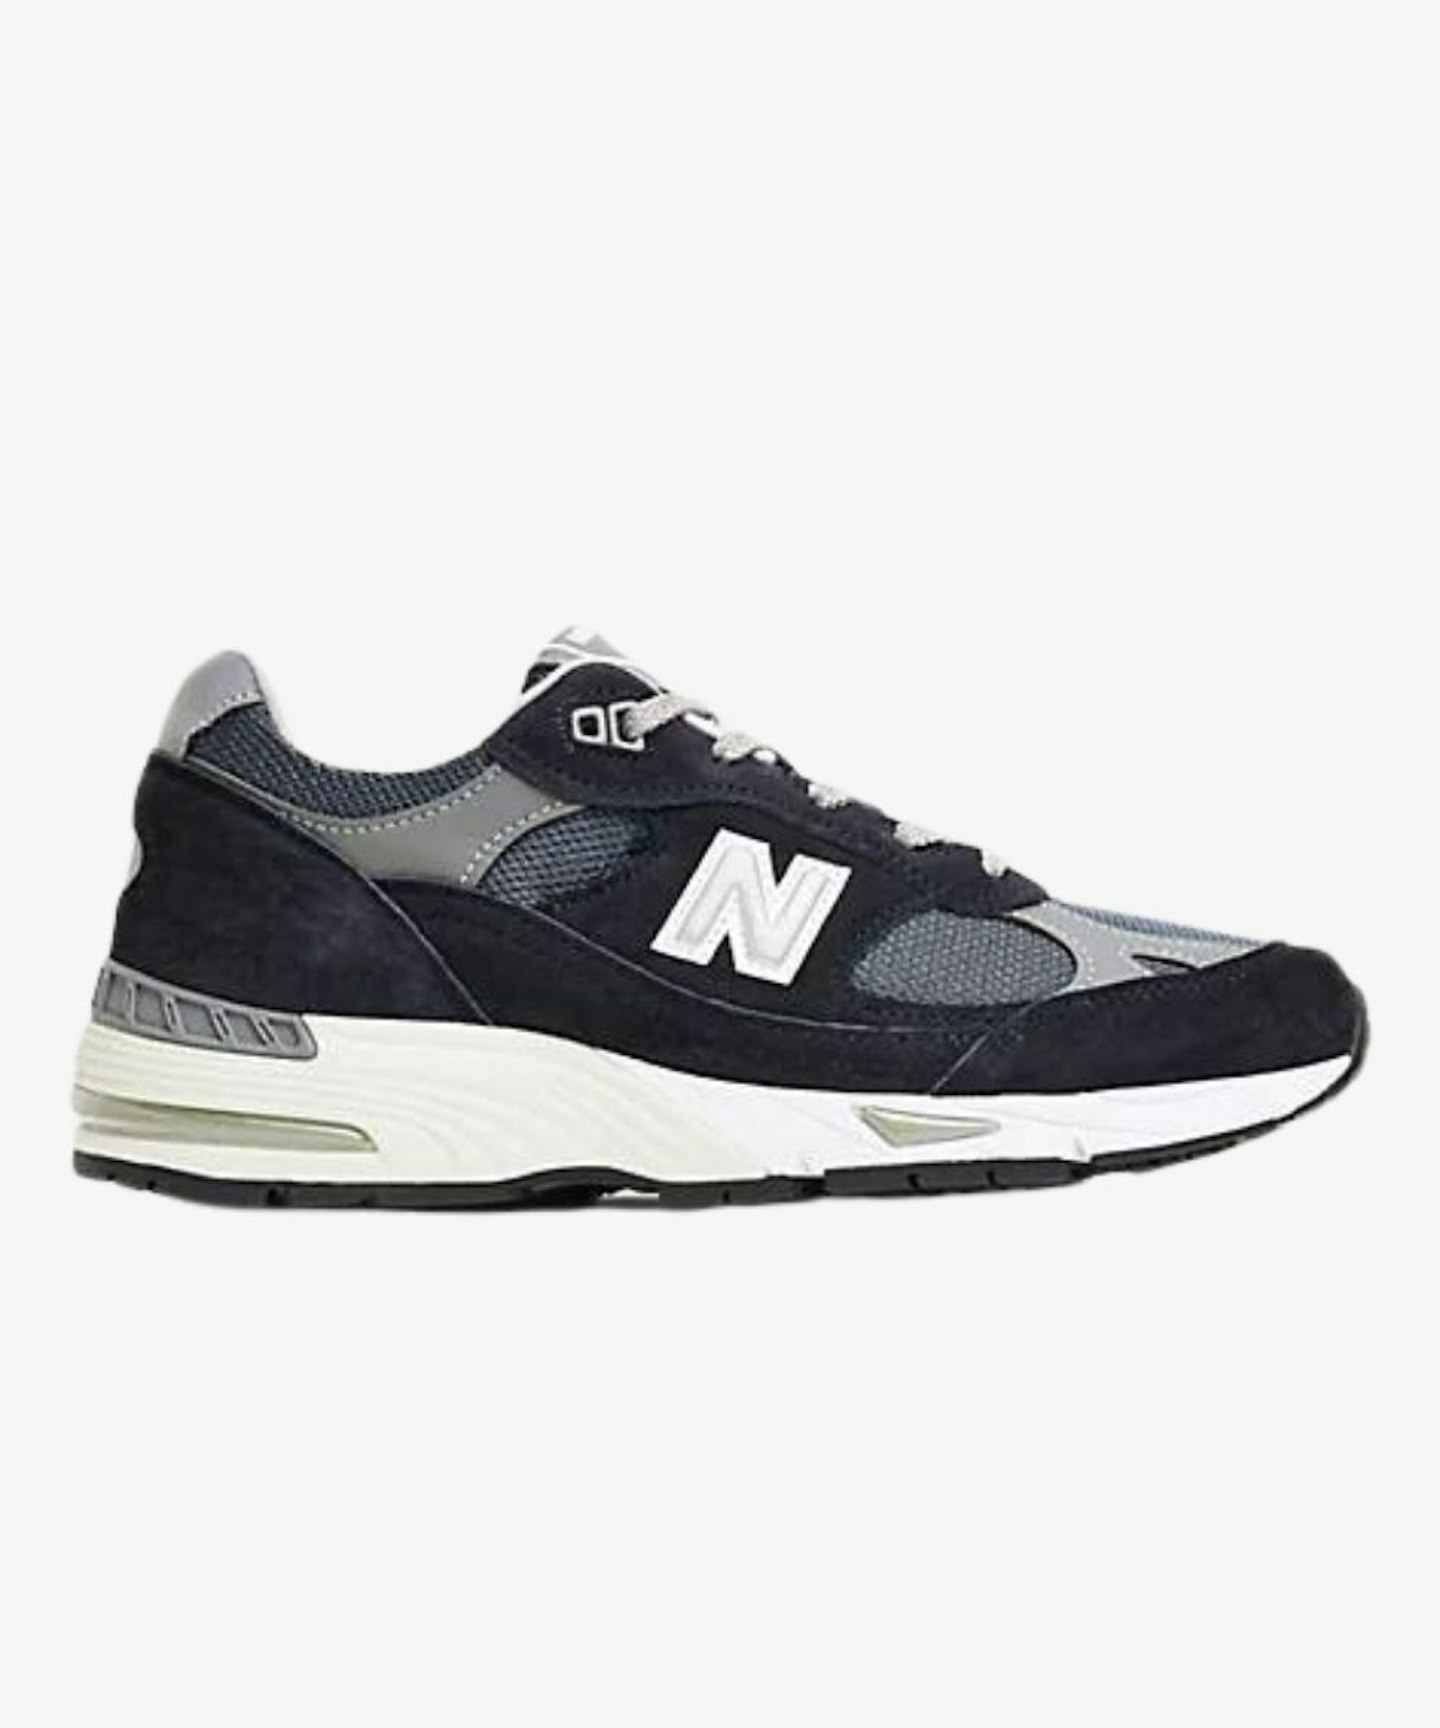 New Balance Made in UK 991, £190